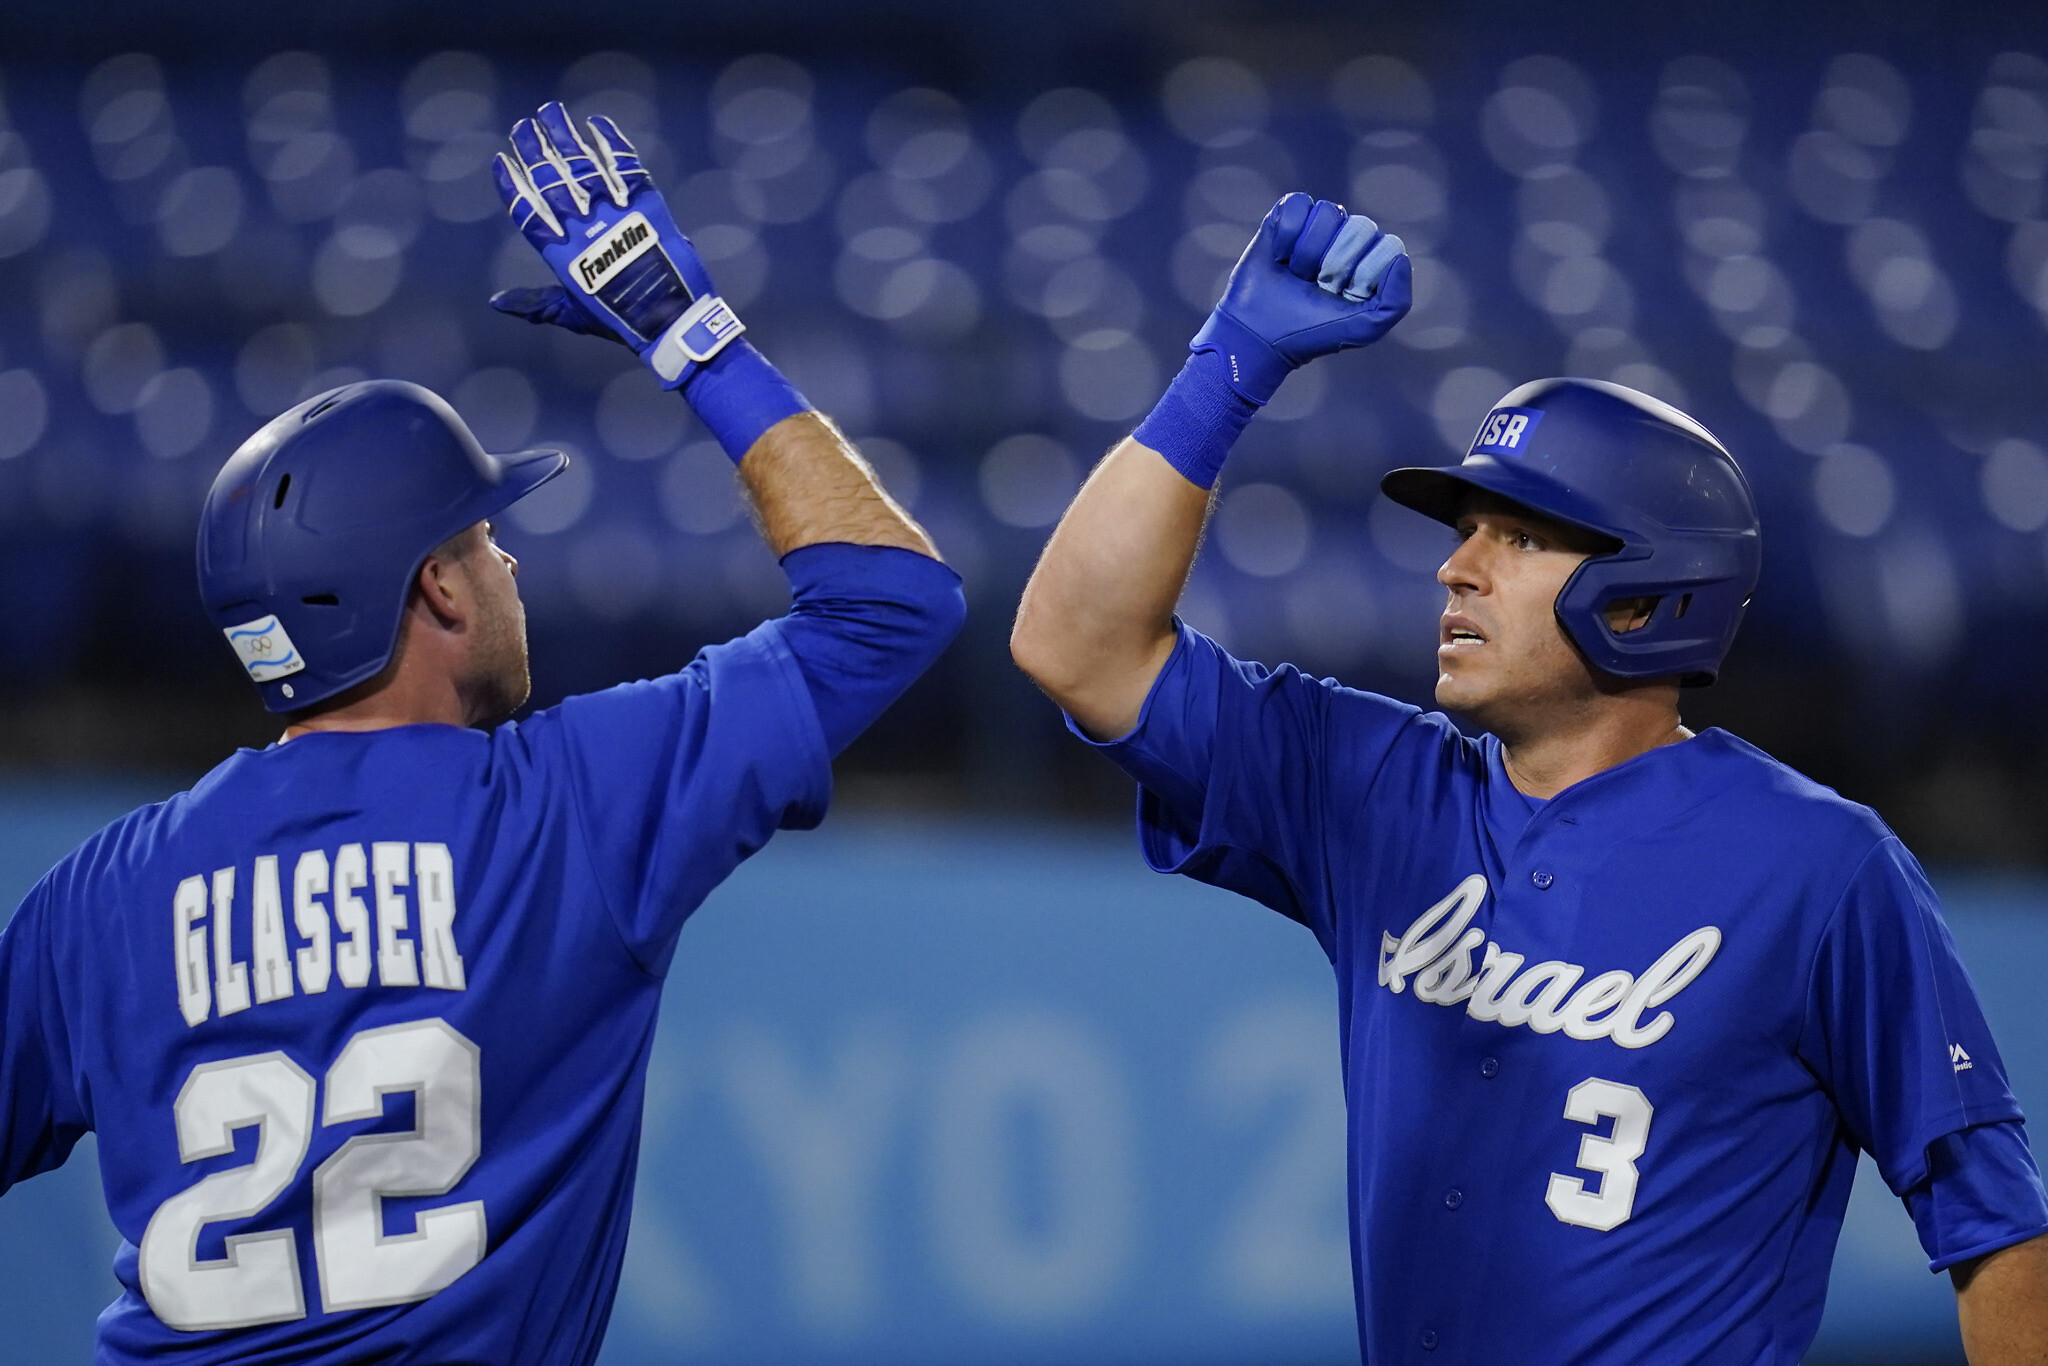 Israel World Baseball Classic 2023 Roster: All-star Joc Pederson stands out  on talented team